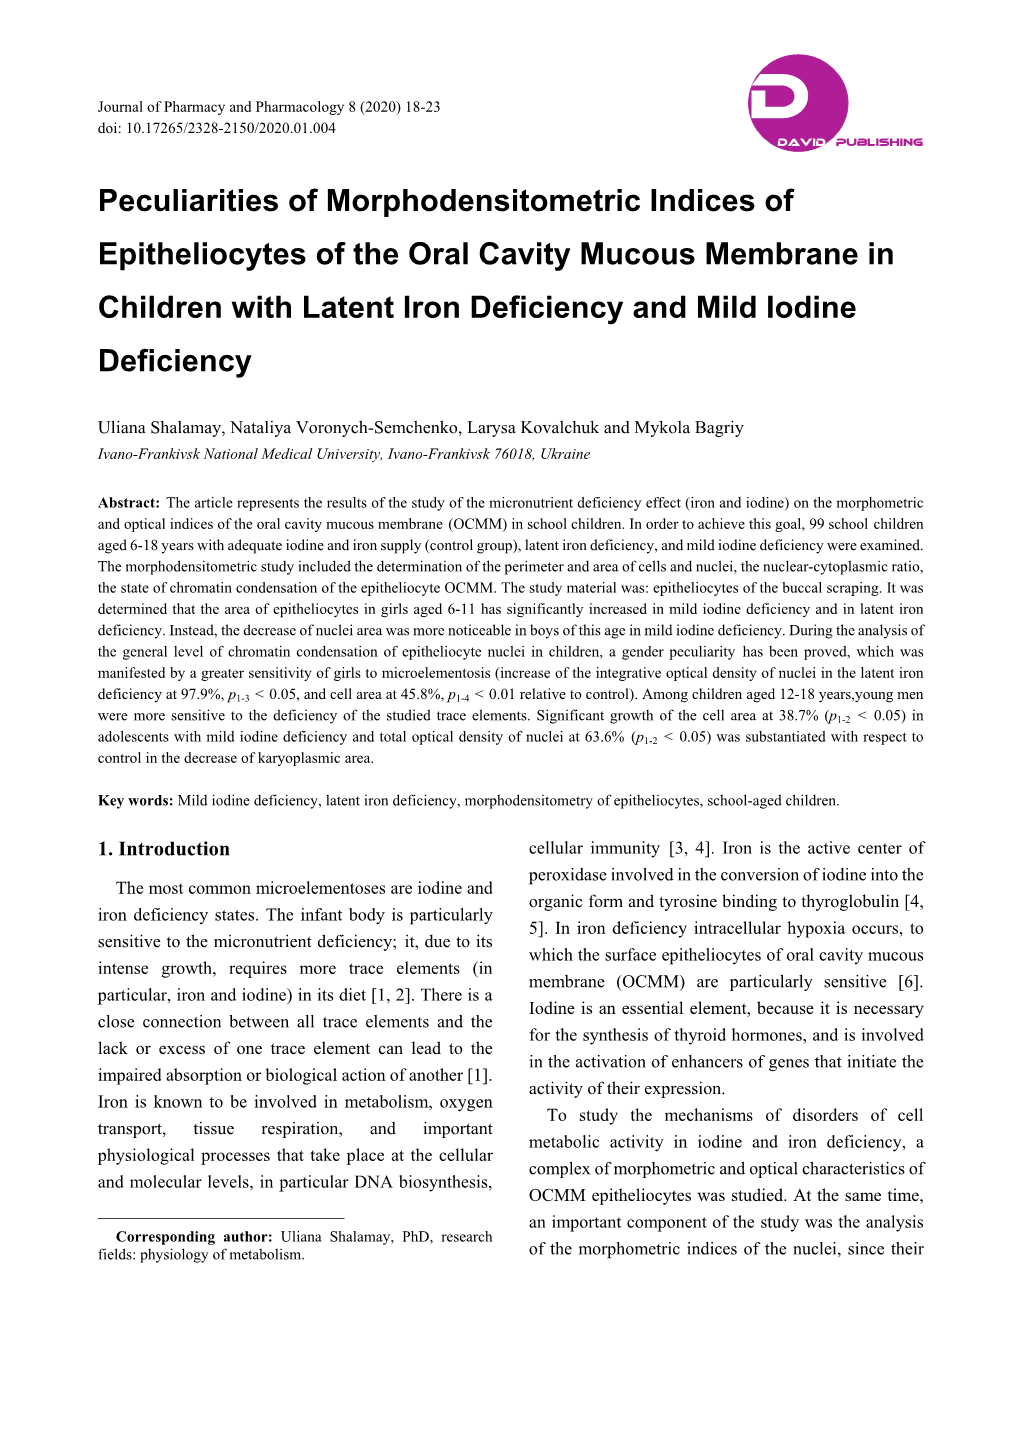 Peculiarities of Morphodensitometric Indices of Epitheliocytes of the Oral Cavity Mucous Membrane in Children with Latent Iron Deficiency and Mild Iodine Deficiency